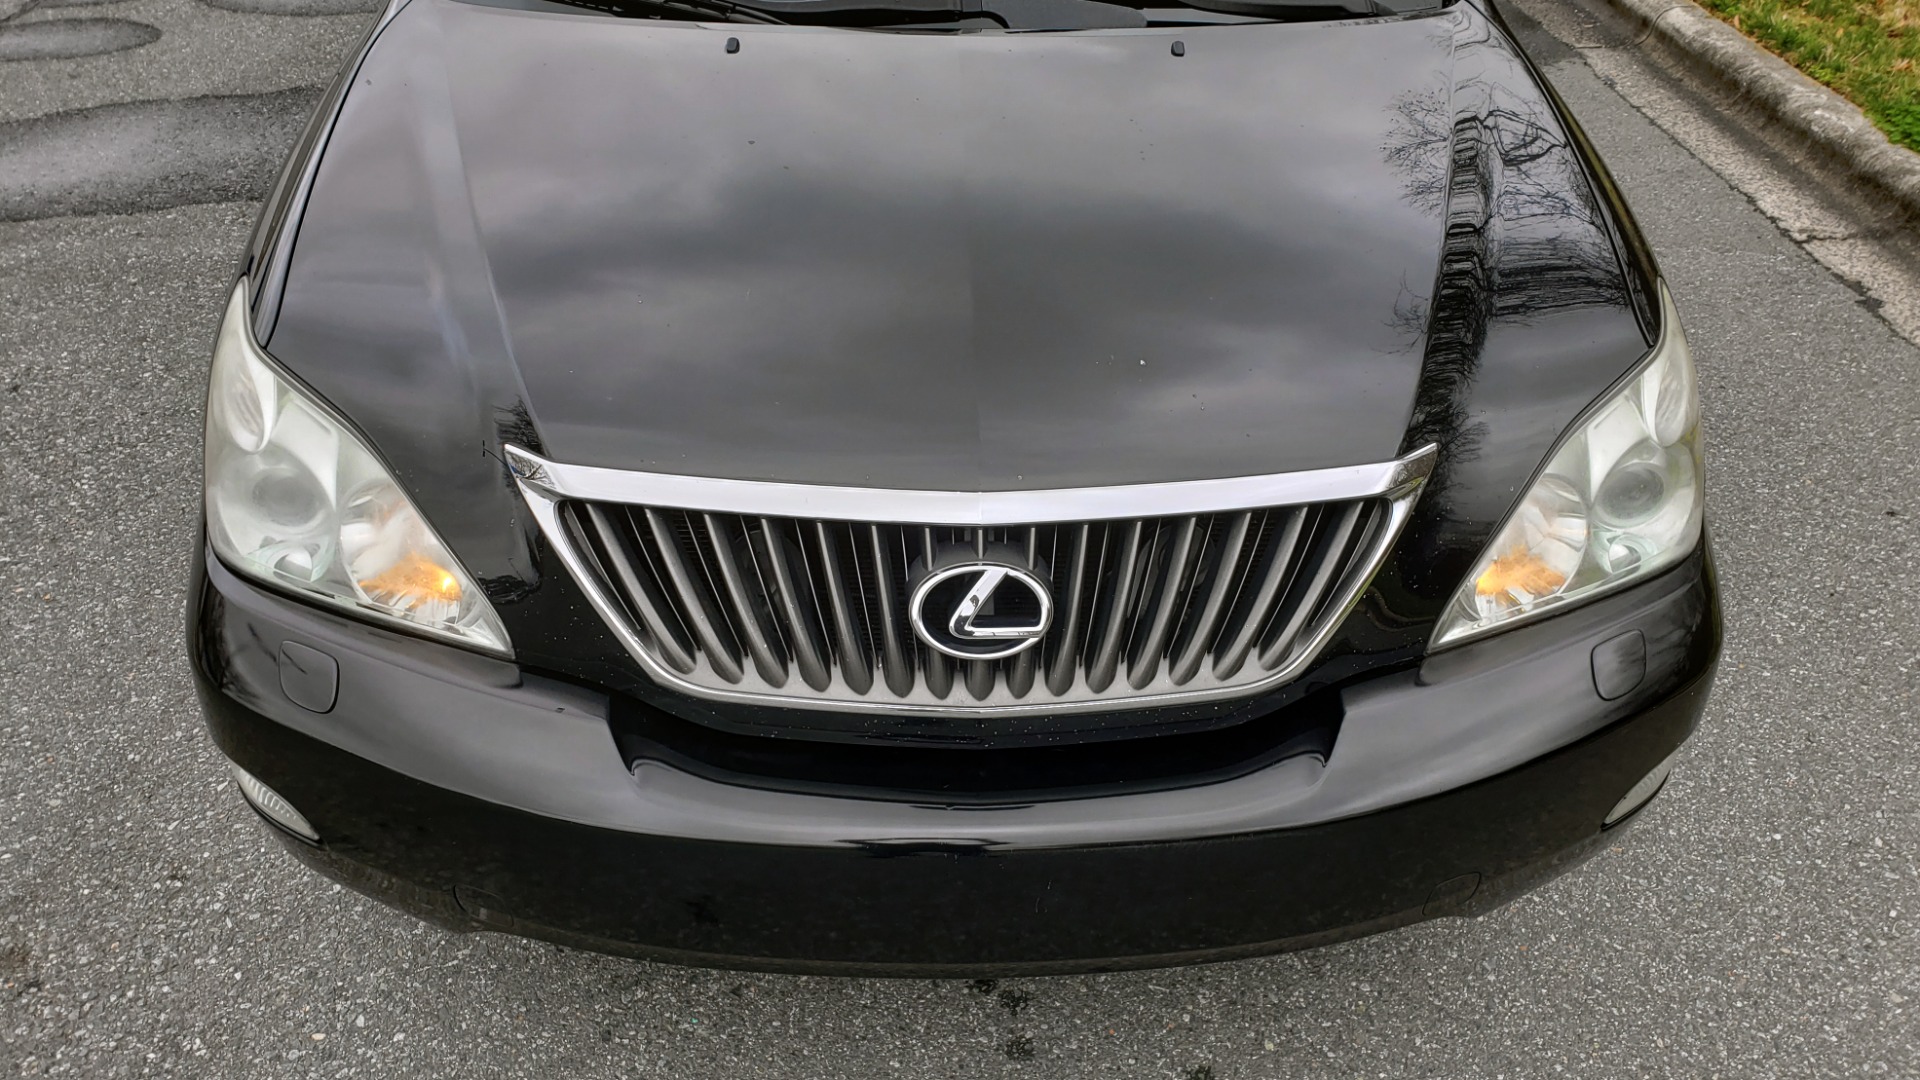 Used 2008 Lexus RX 350 LUXURY EDITION / NAV / SUNROOF / REARVIEW for sale Sold at Formula Imports in Charlotte NC 28227 13